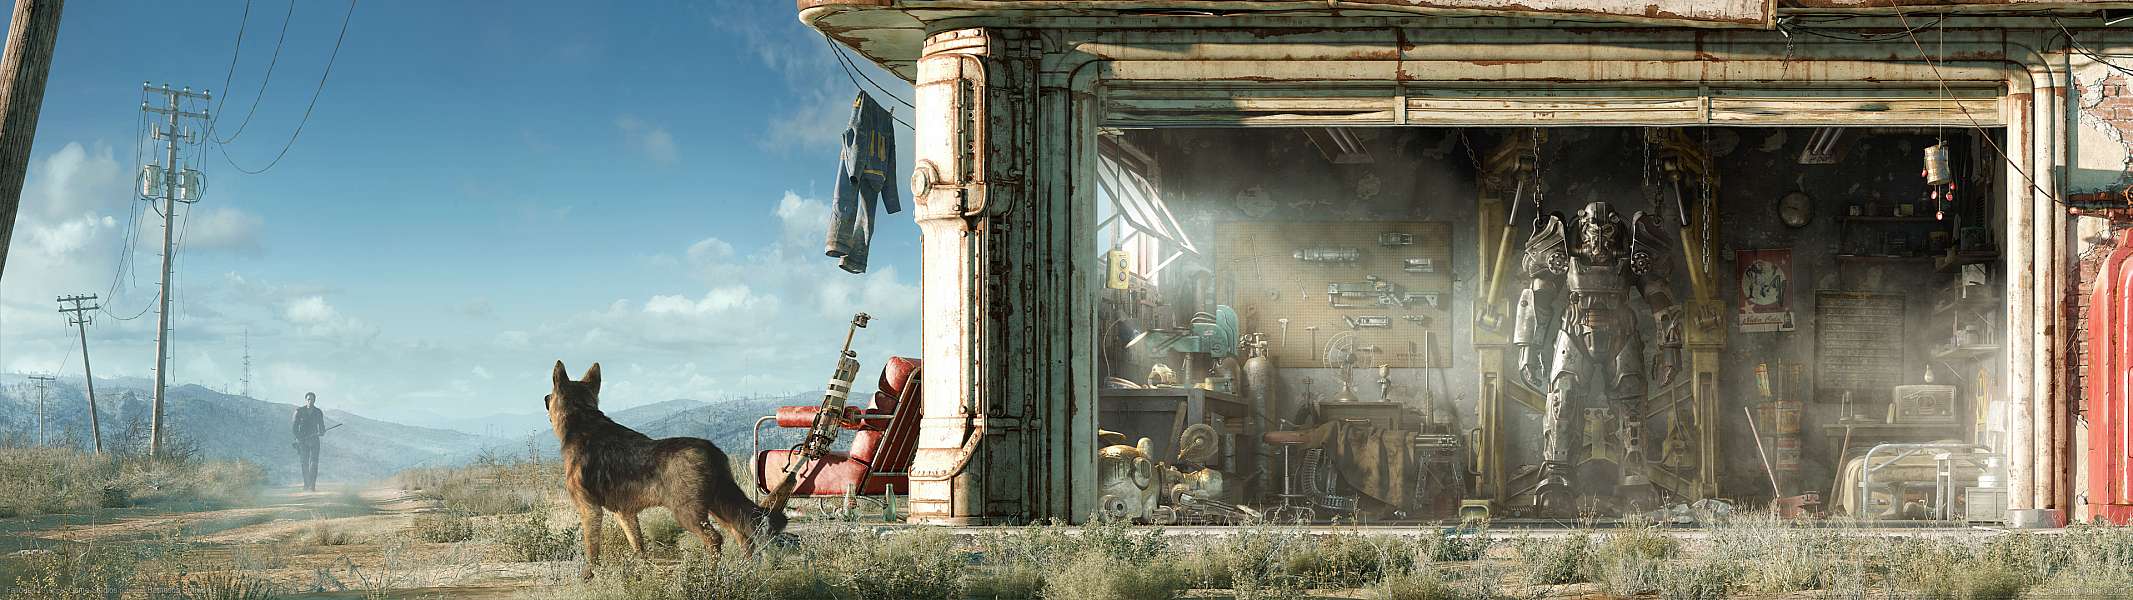 Fallout 4 dual screen achtergrond